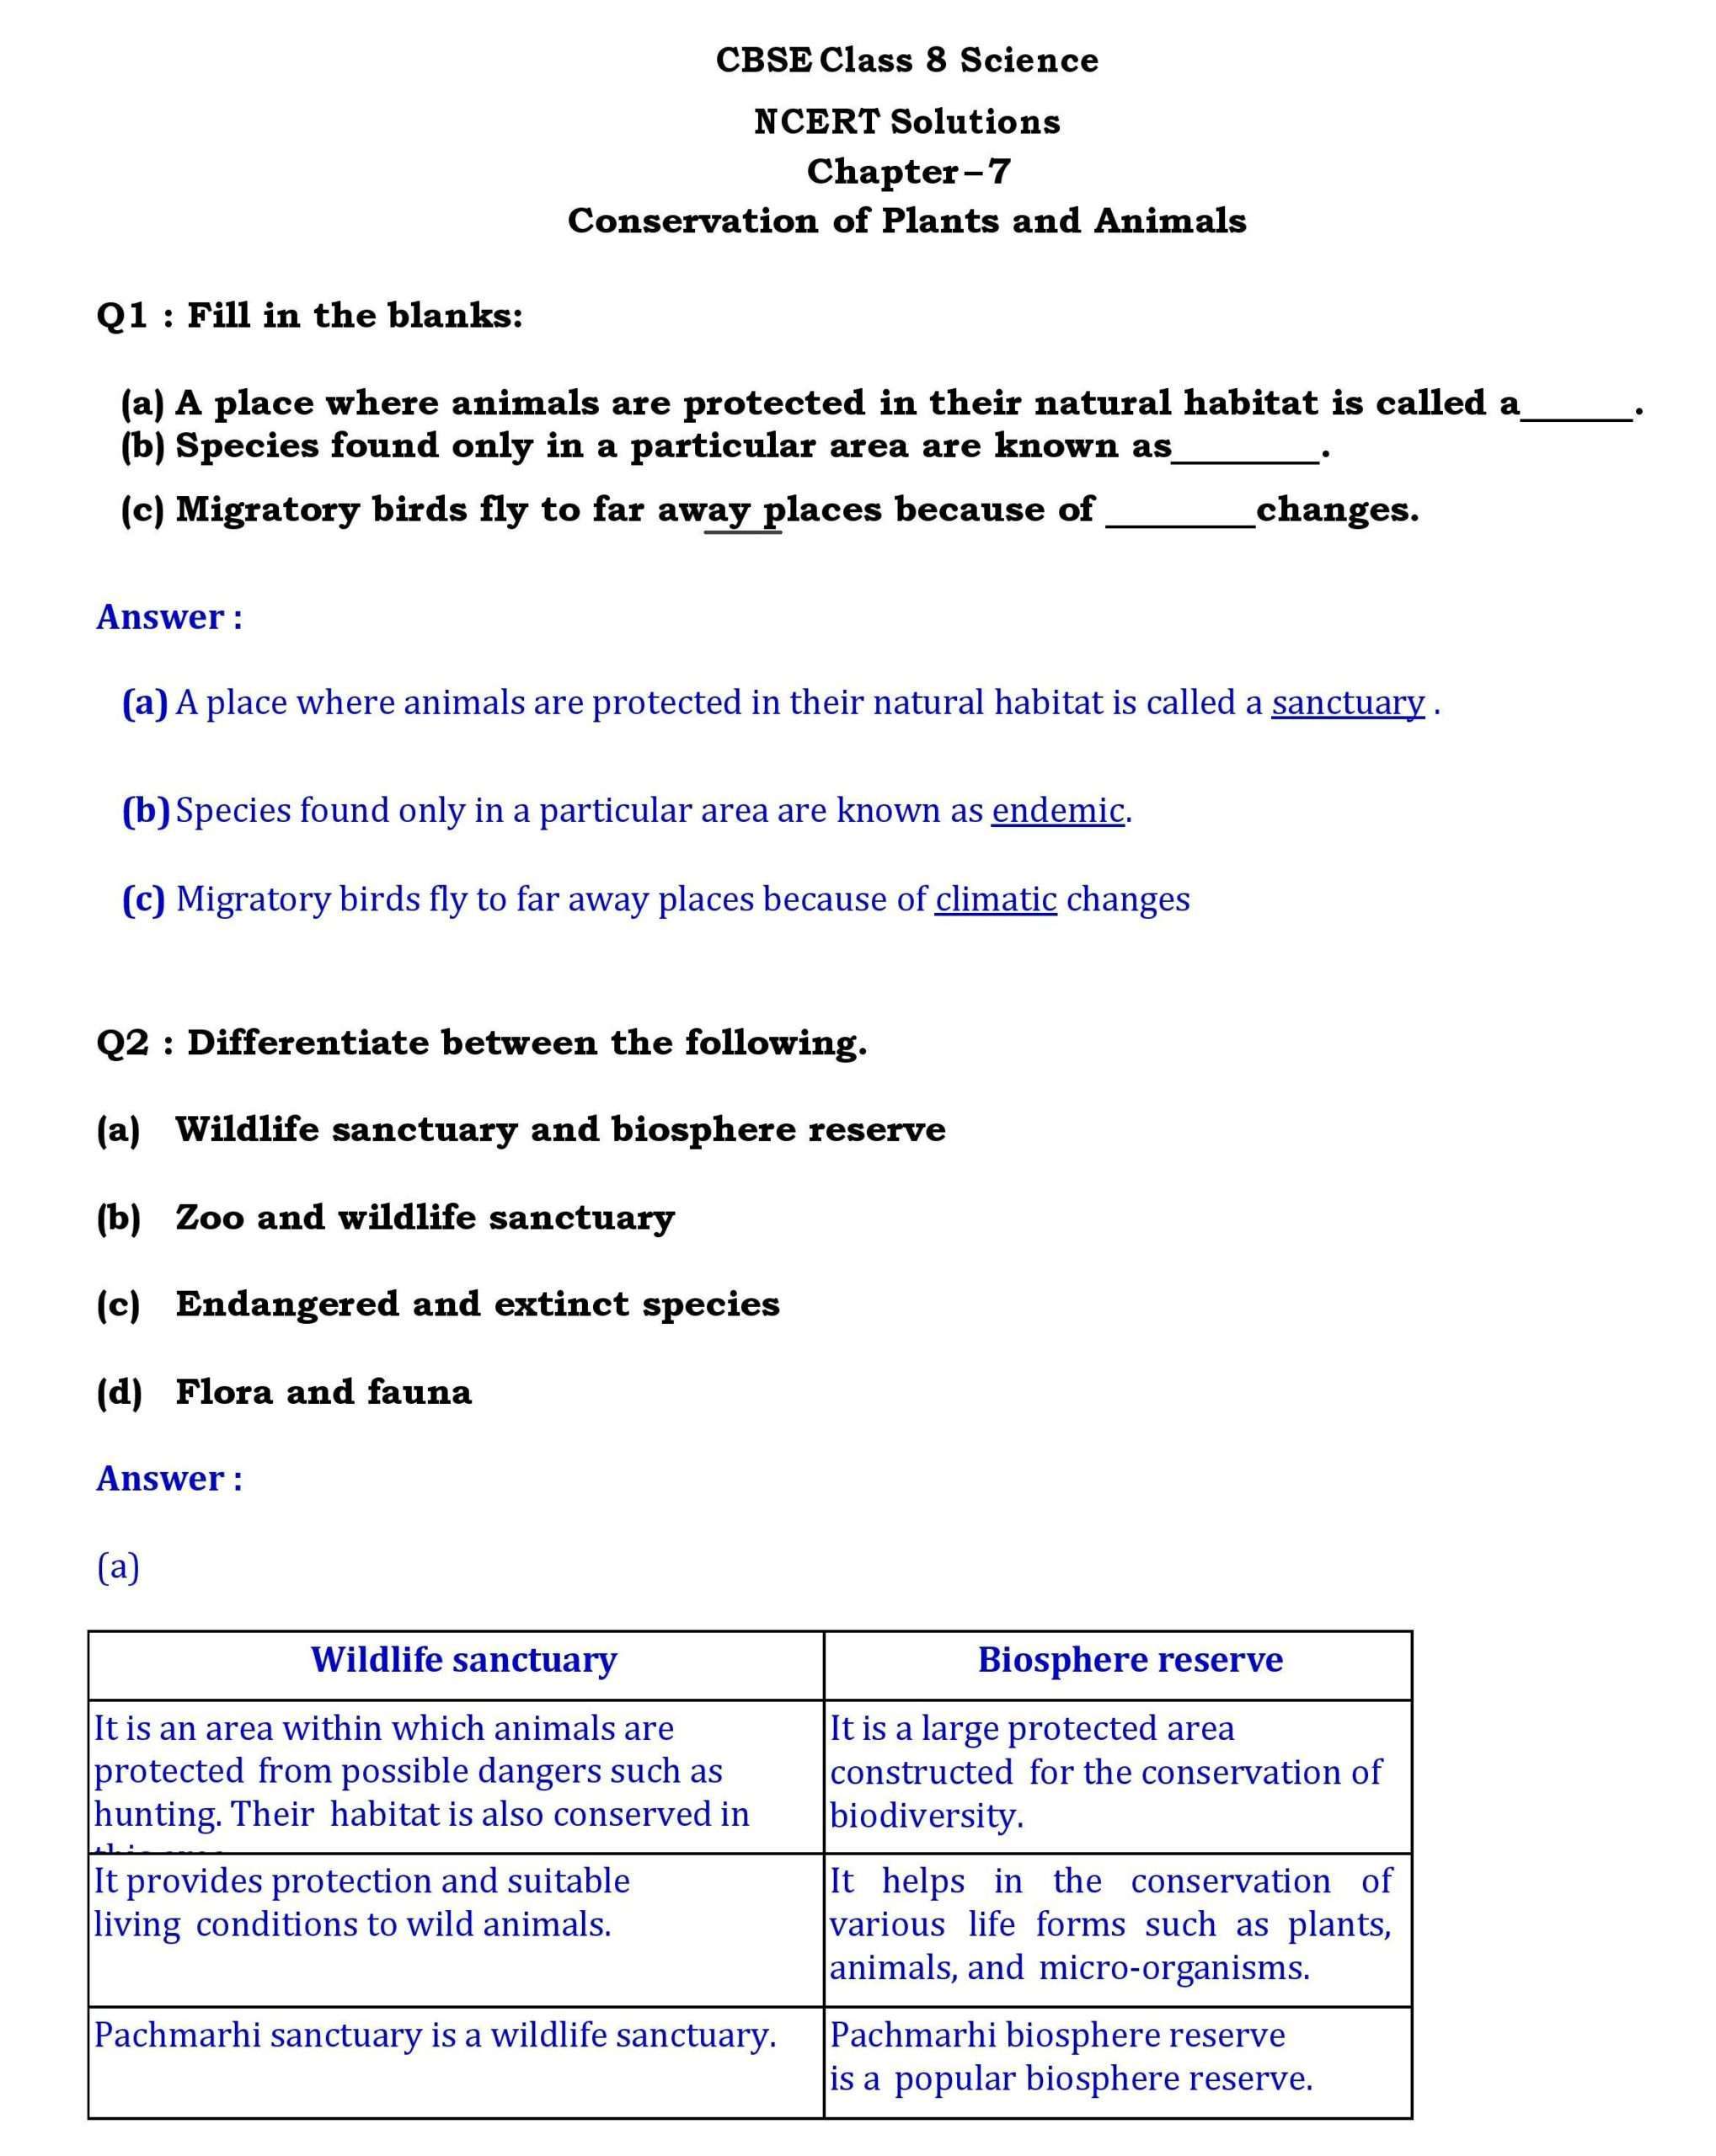 NCERT Solutions for Class 8 Science Chapter 7 page 001 scaled